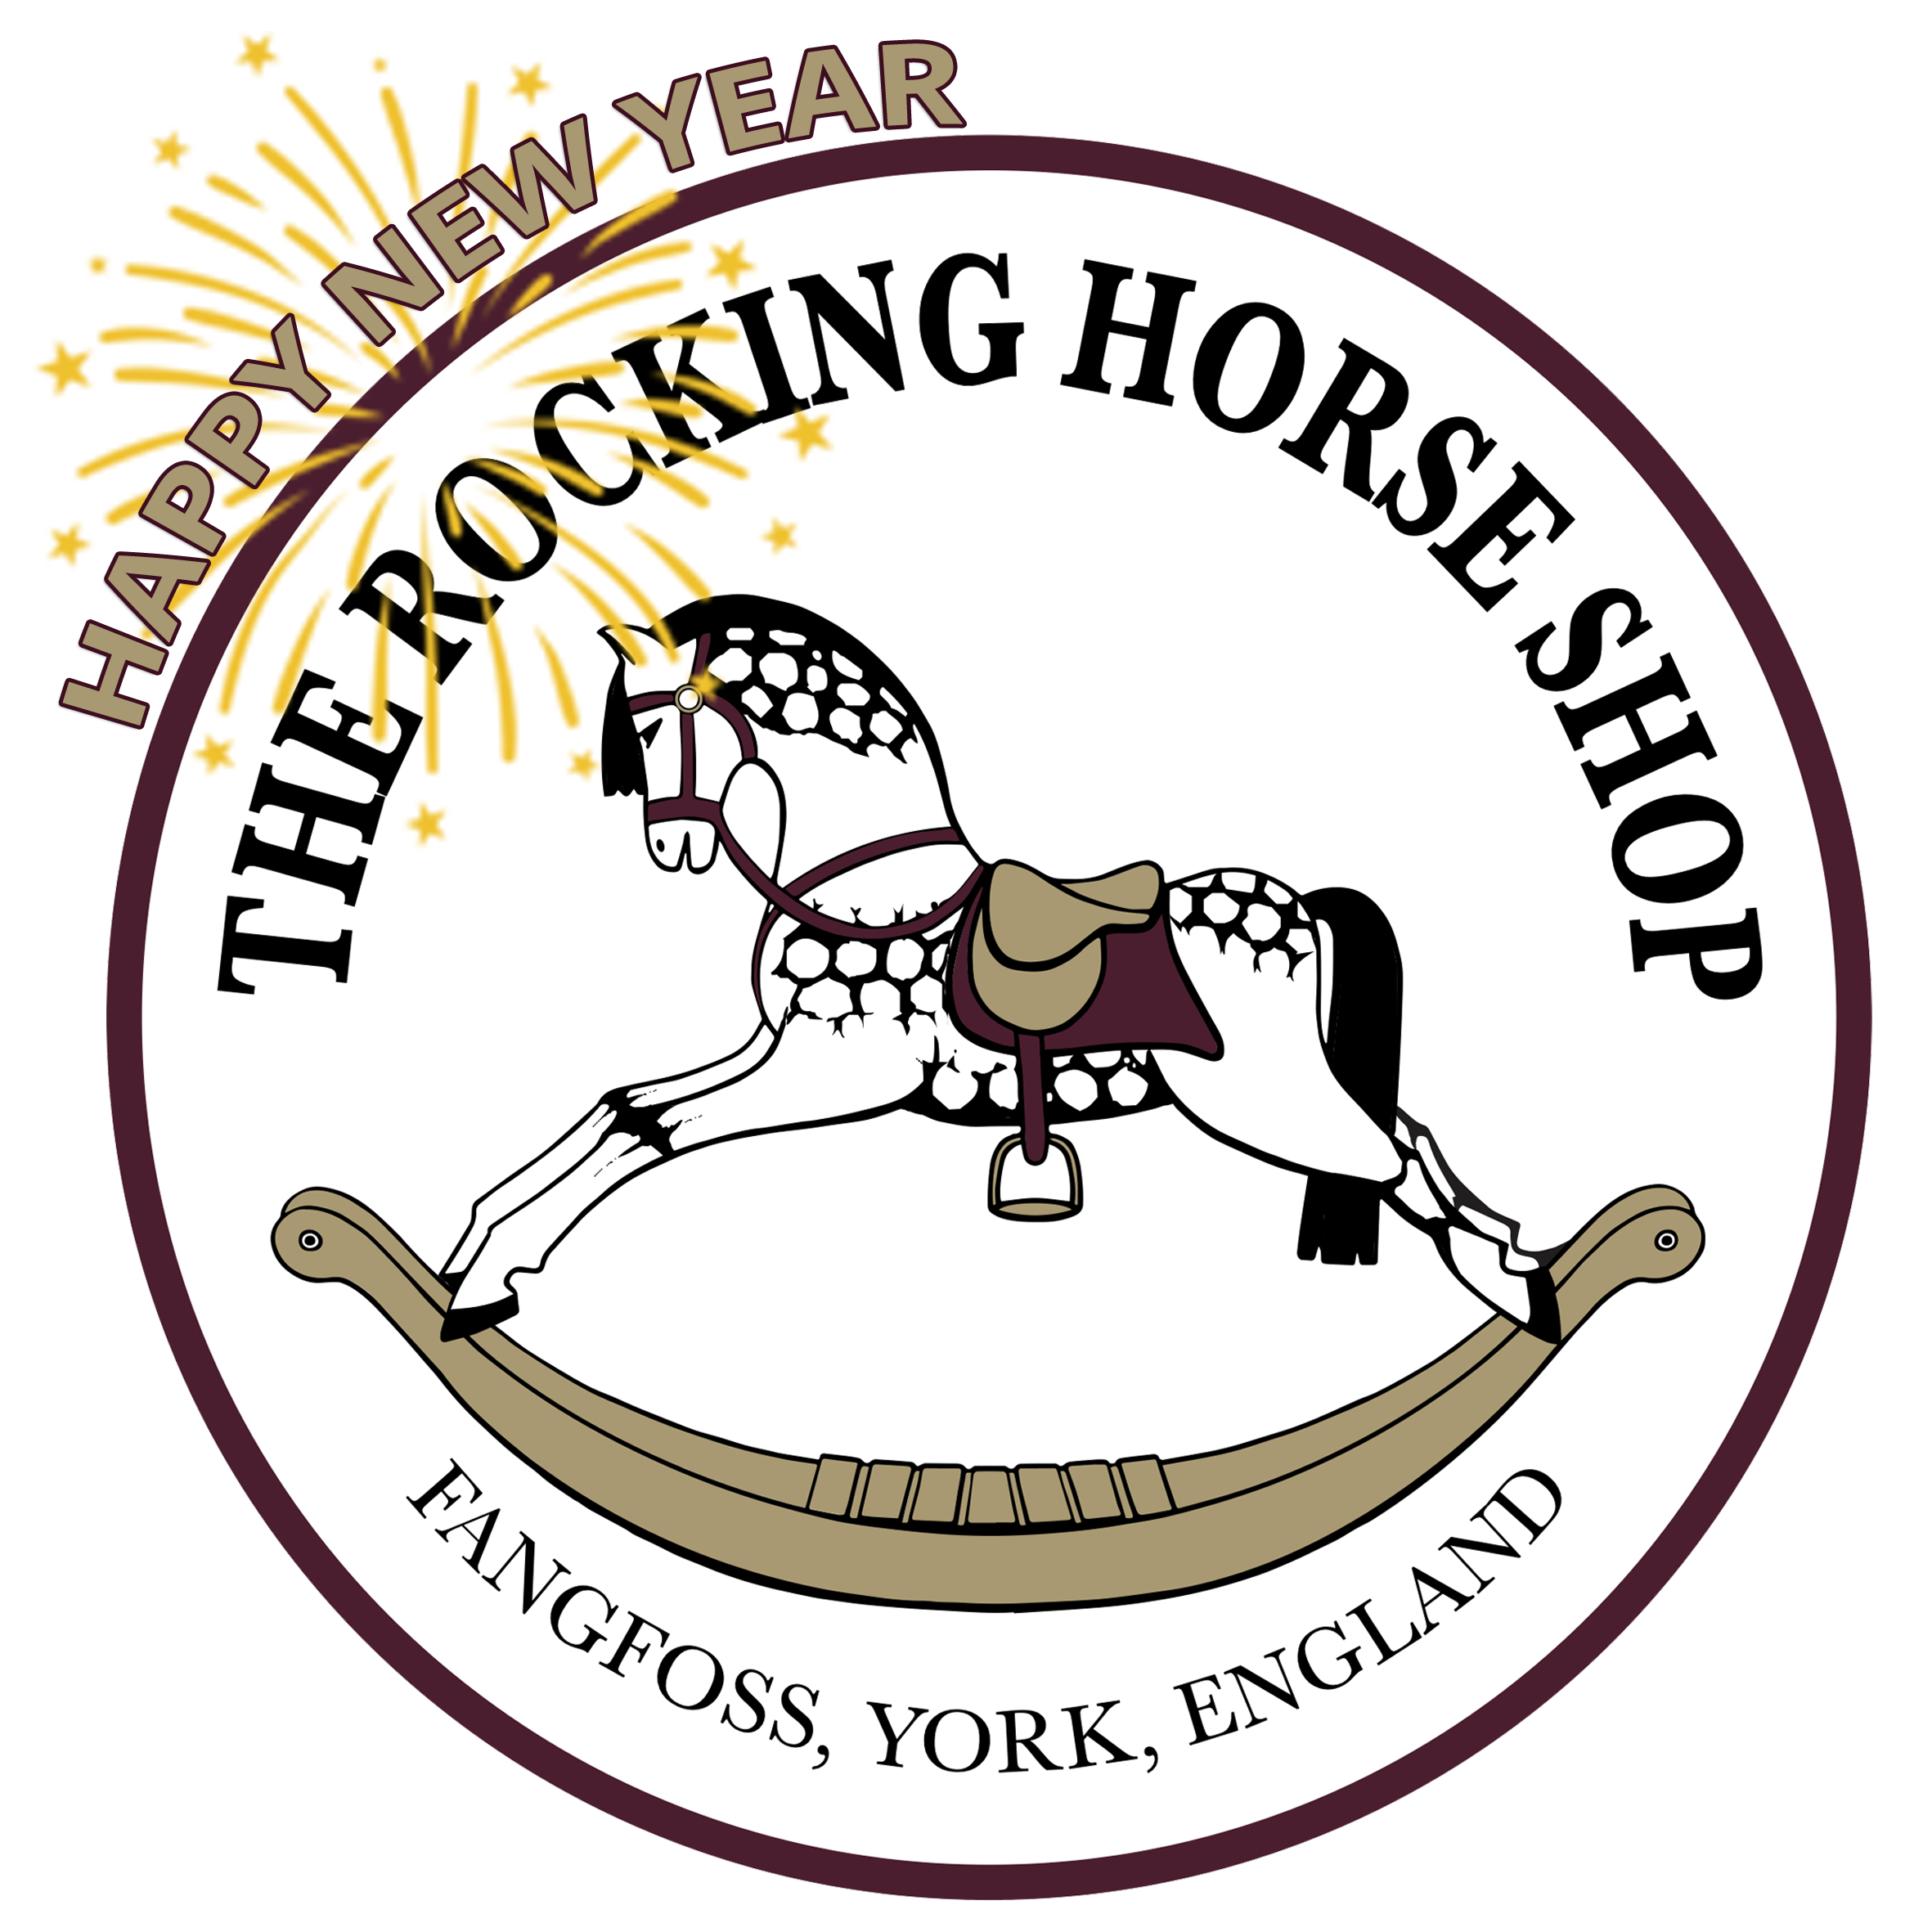 The rocking horse shop home